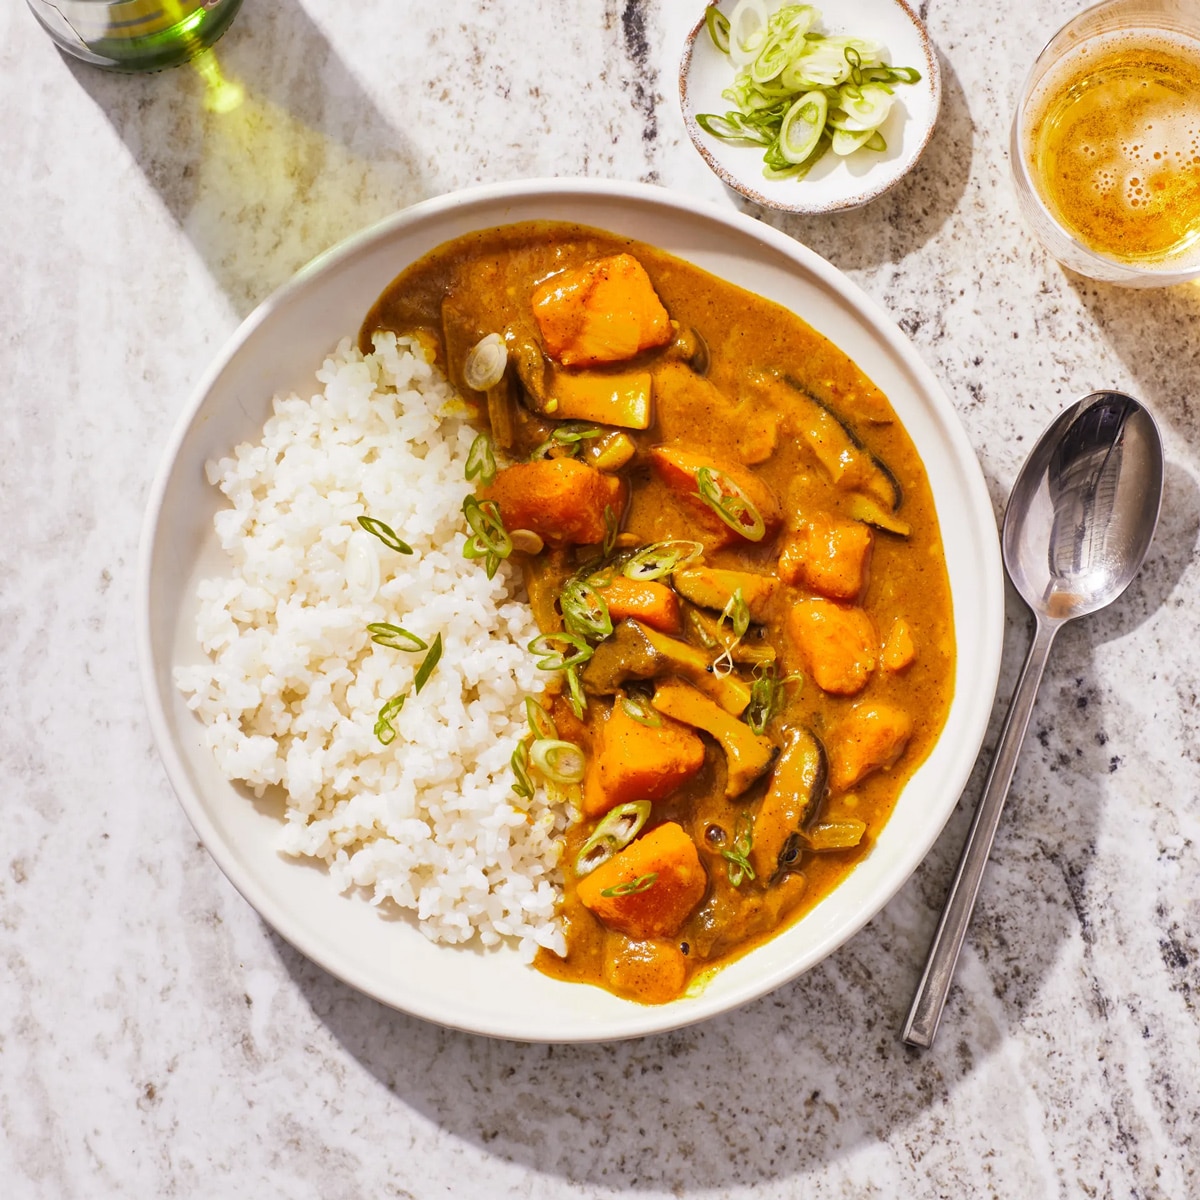 Japanese curry with winter squash and mushrooms